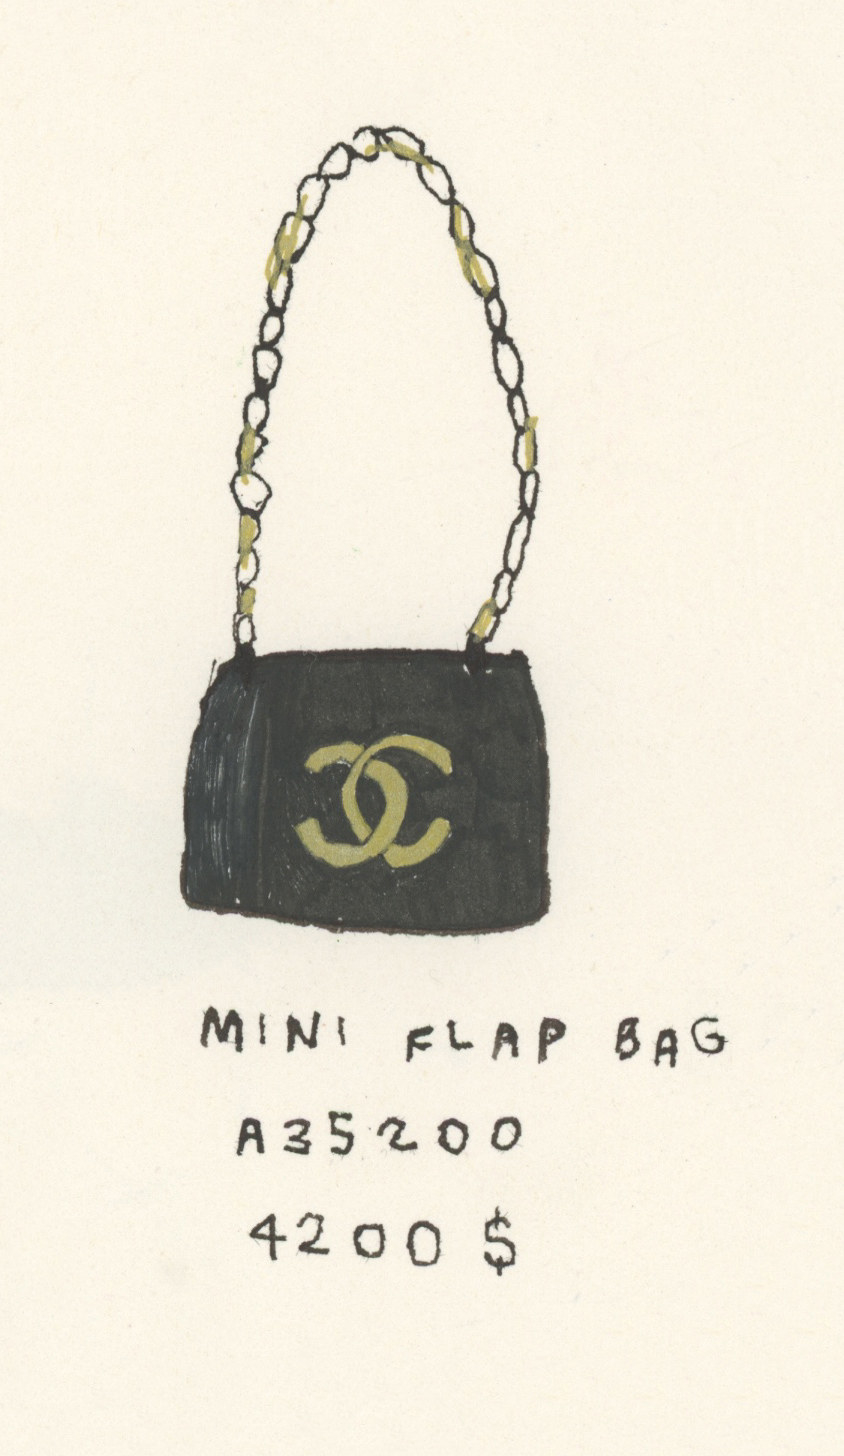 drawing of a Chanel purse